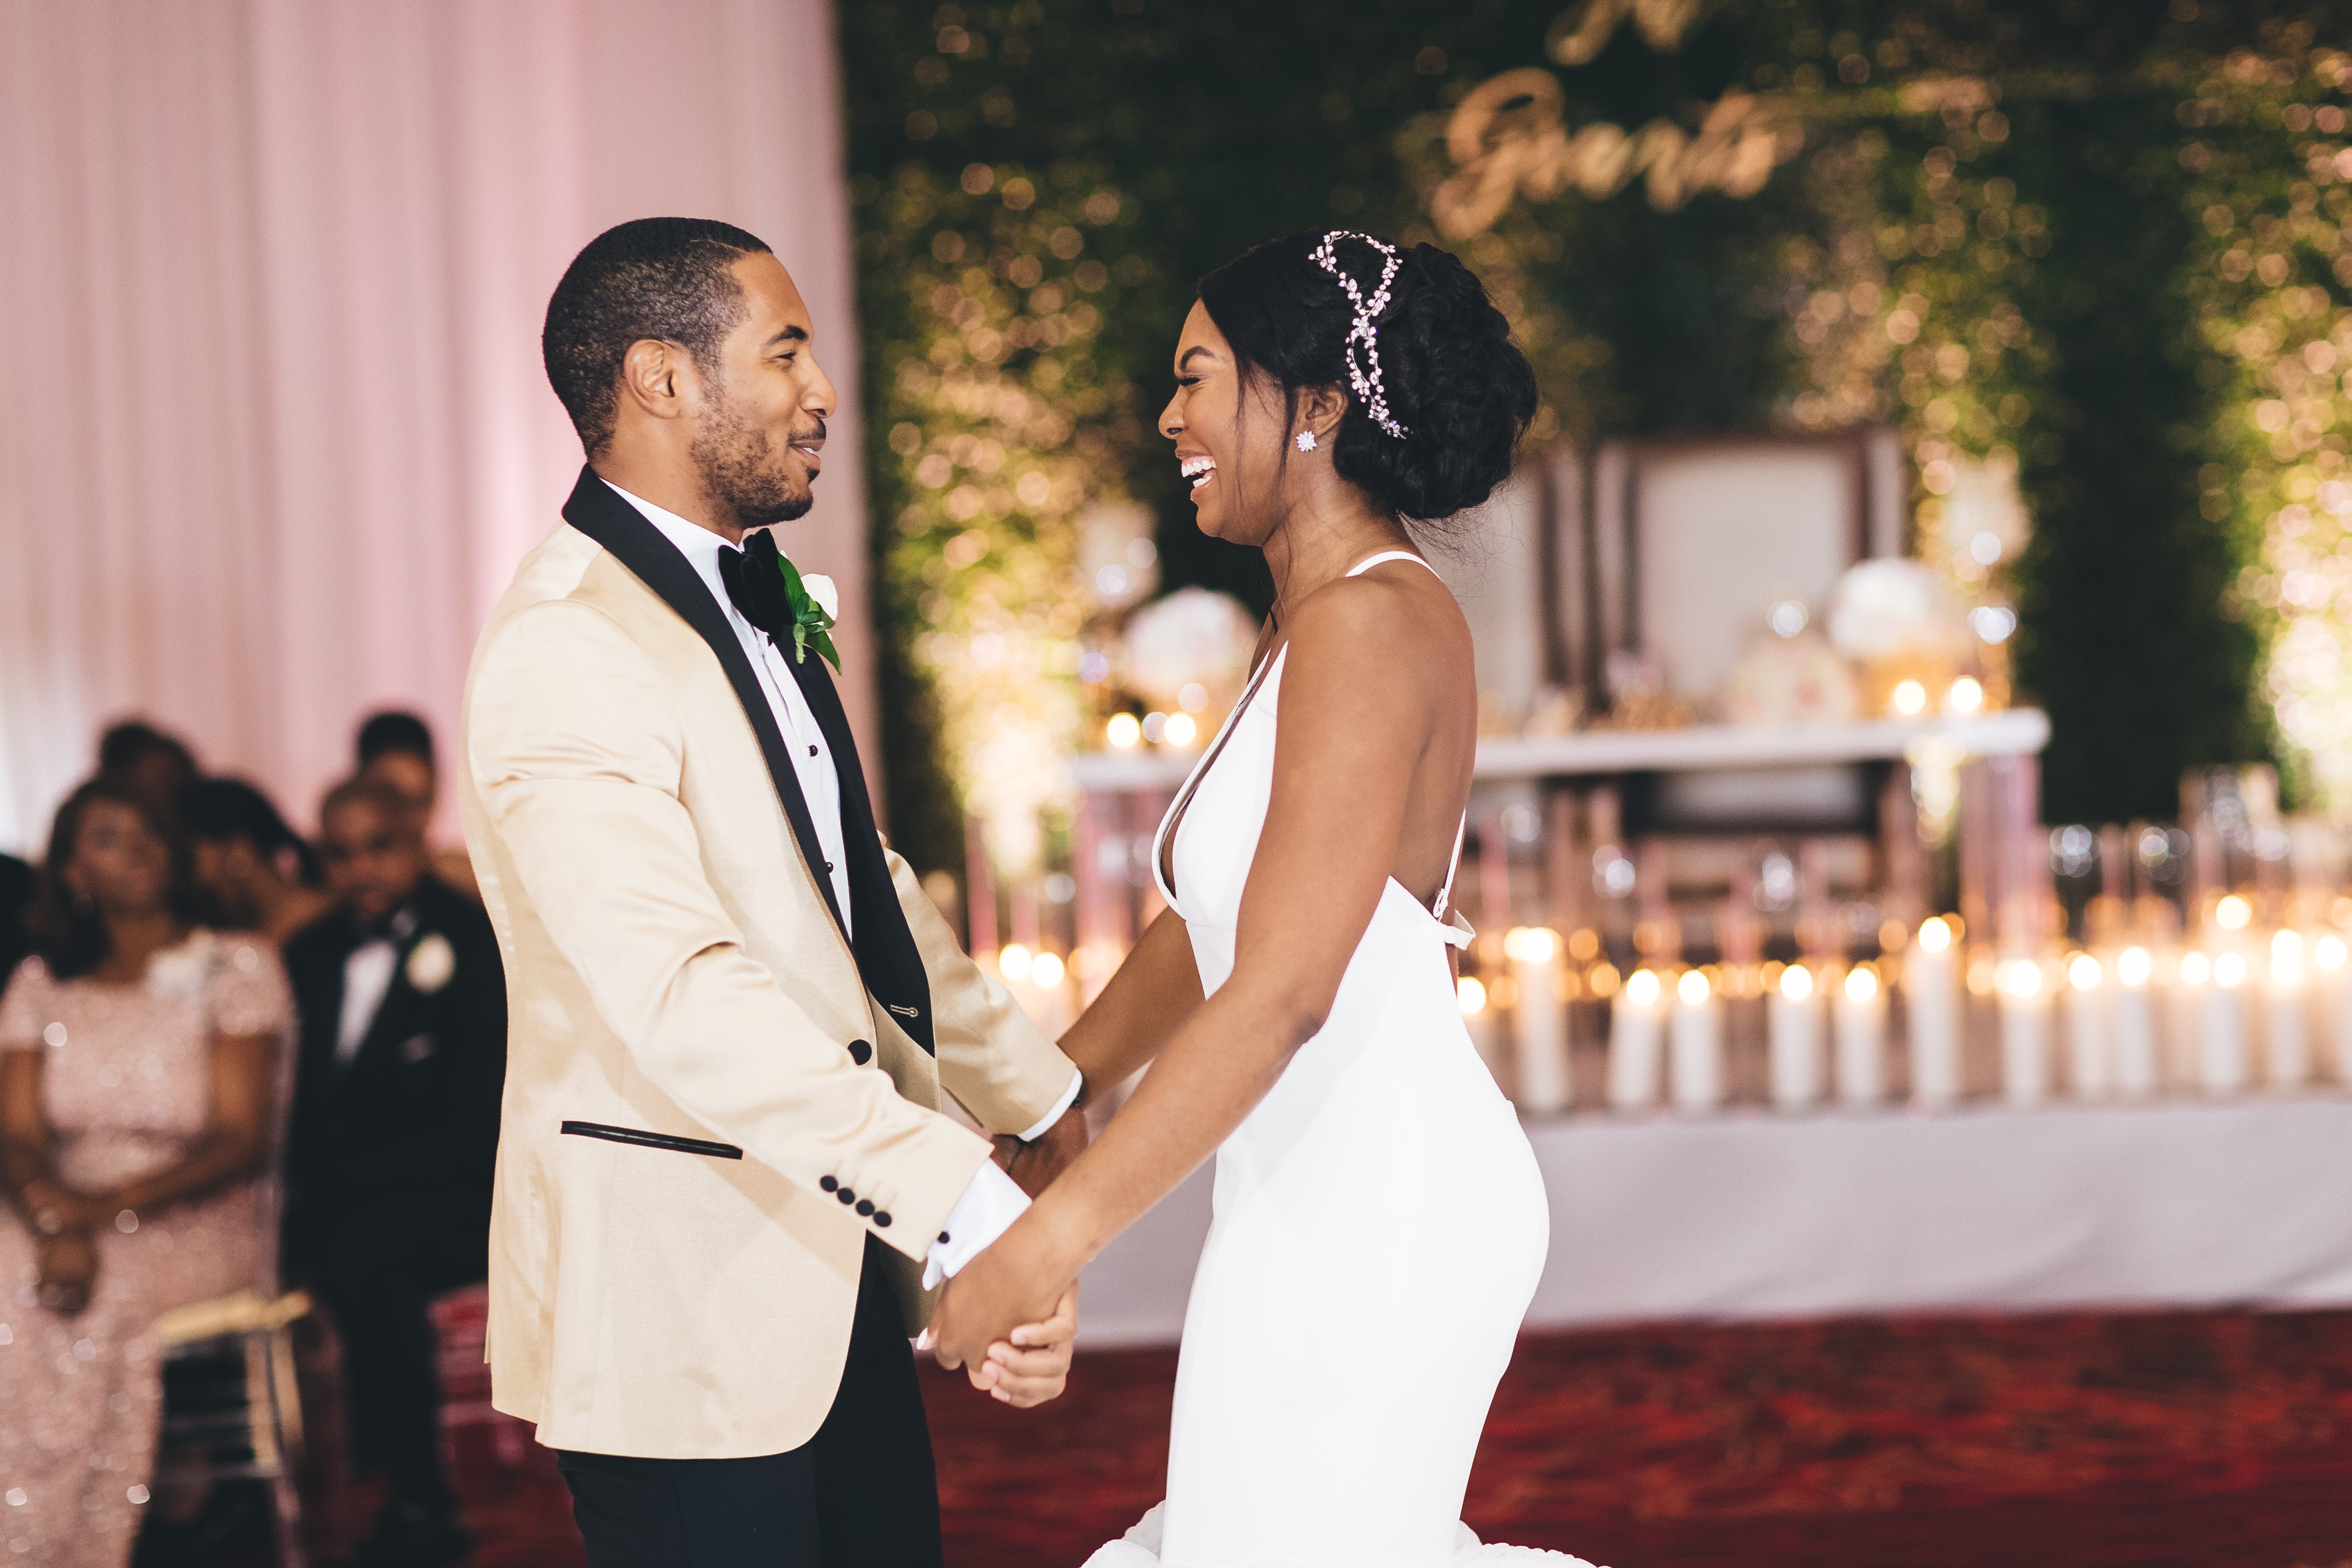 Bridal Bliss: Chavez And Reneé Went All Out For Their Romantic Wedding Day